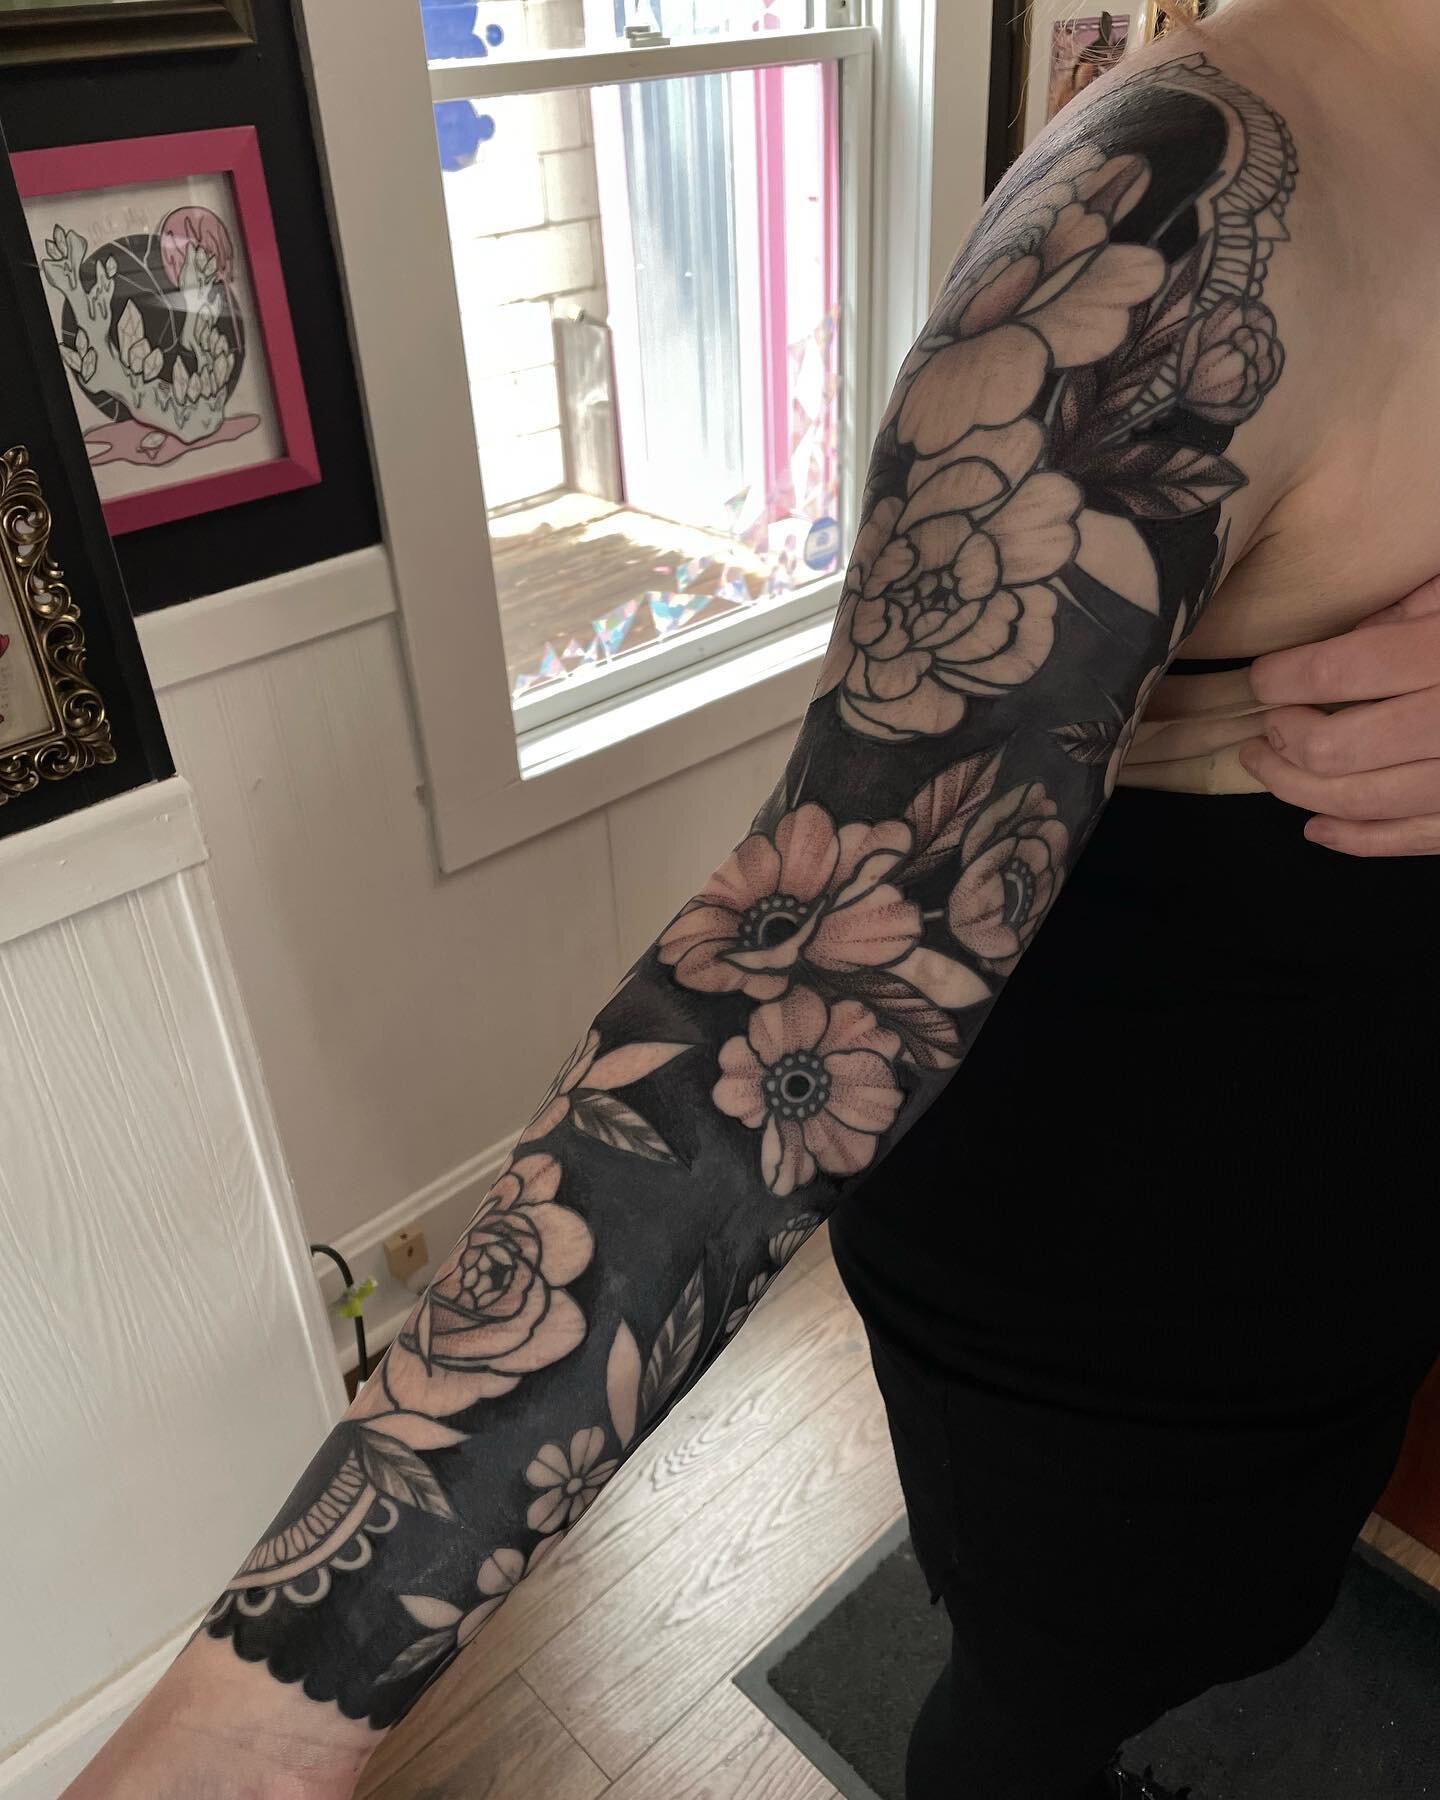 Last session on this blackout sleeve 🥺 3 years in the making 🫶🏻 some healed, some fresh, some touch ups, a little but of everything going on lol 
.
.
.
#tattoo #tattoos #sleeve #tattoosleeve #floralsleeve #blackoutsleeve #blackout #wisconsin